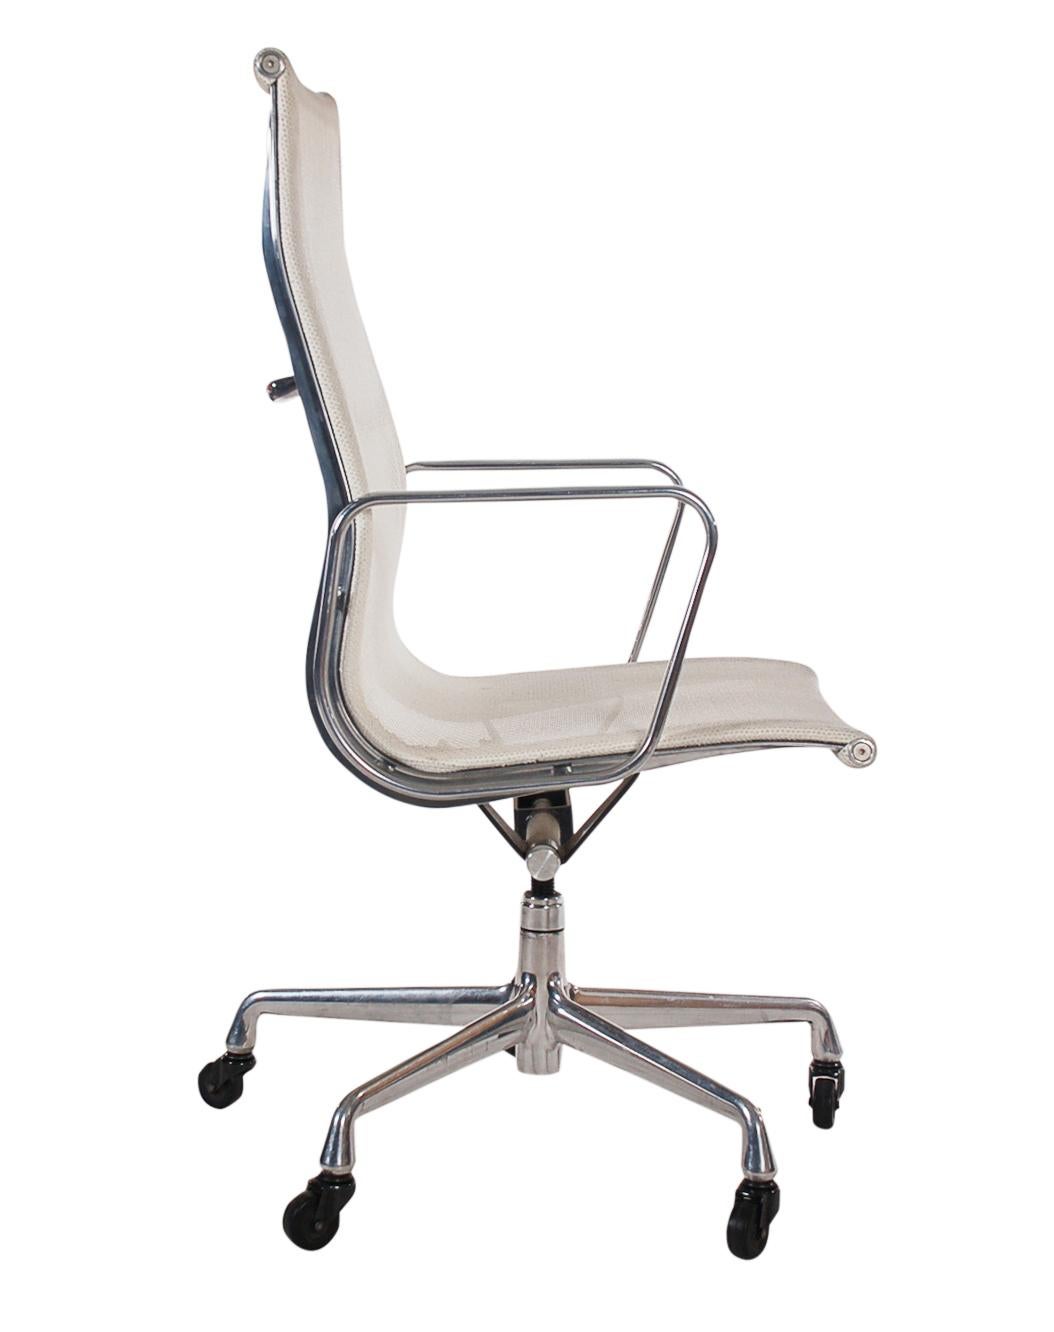 Late 20th Century Mid-Century Modern Charles Eames for Herman Miller Aluminum Group Office Chair